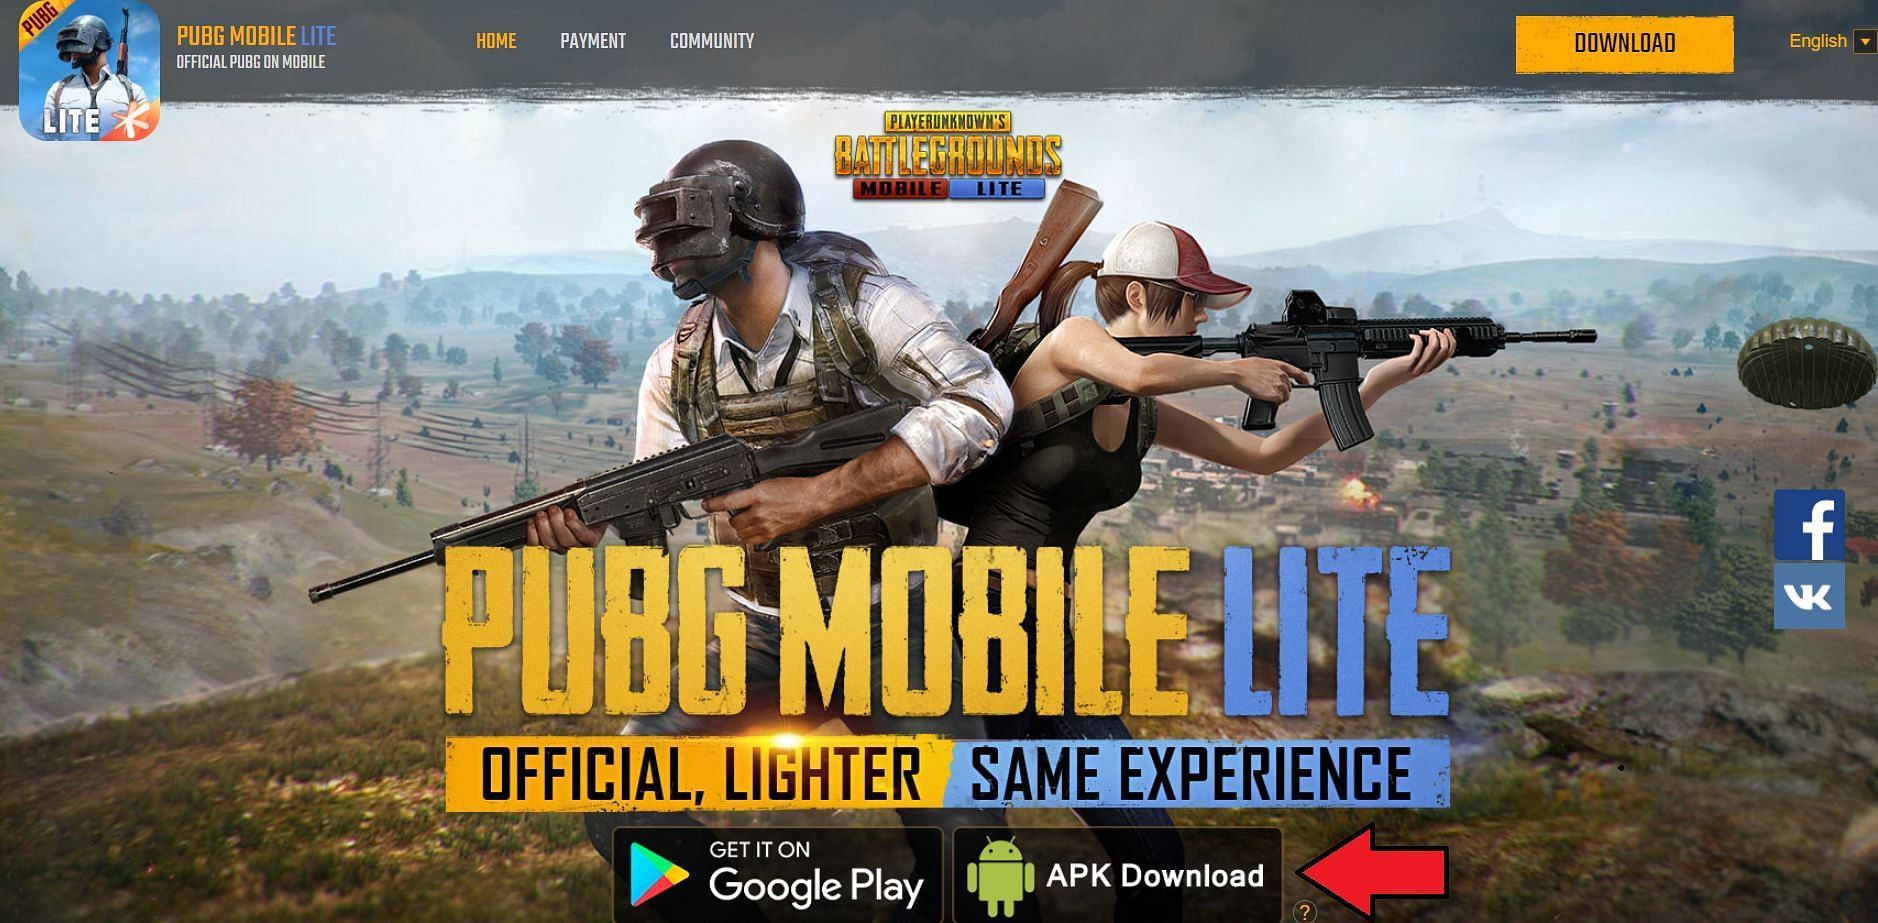 Clicking on this icon will commence the download for the APK file (Image via PUBG Mobile Lite)